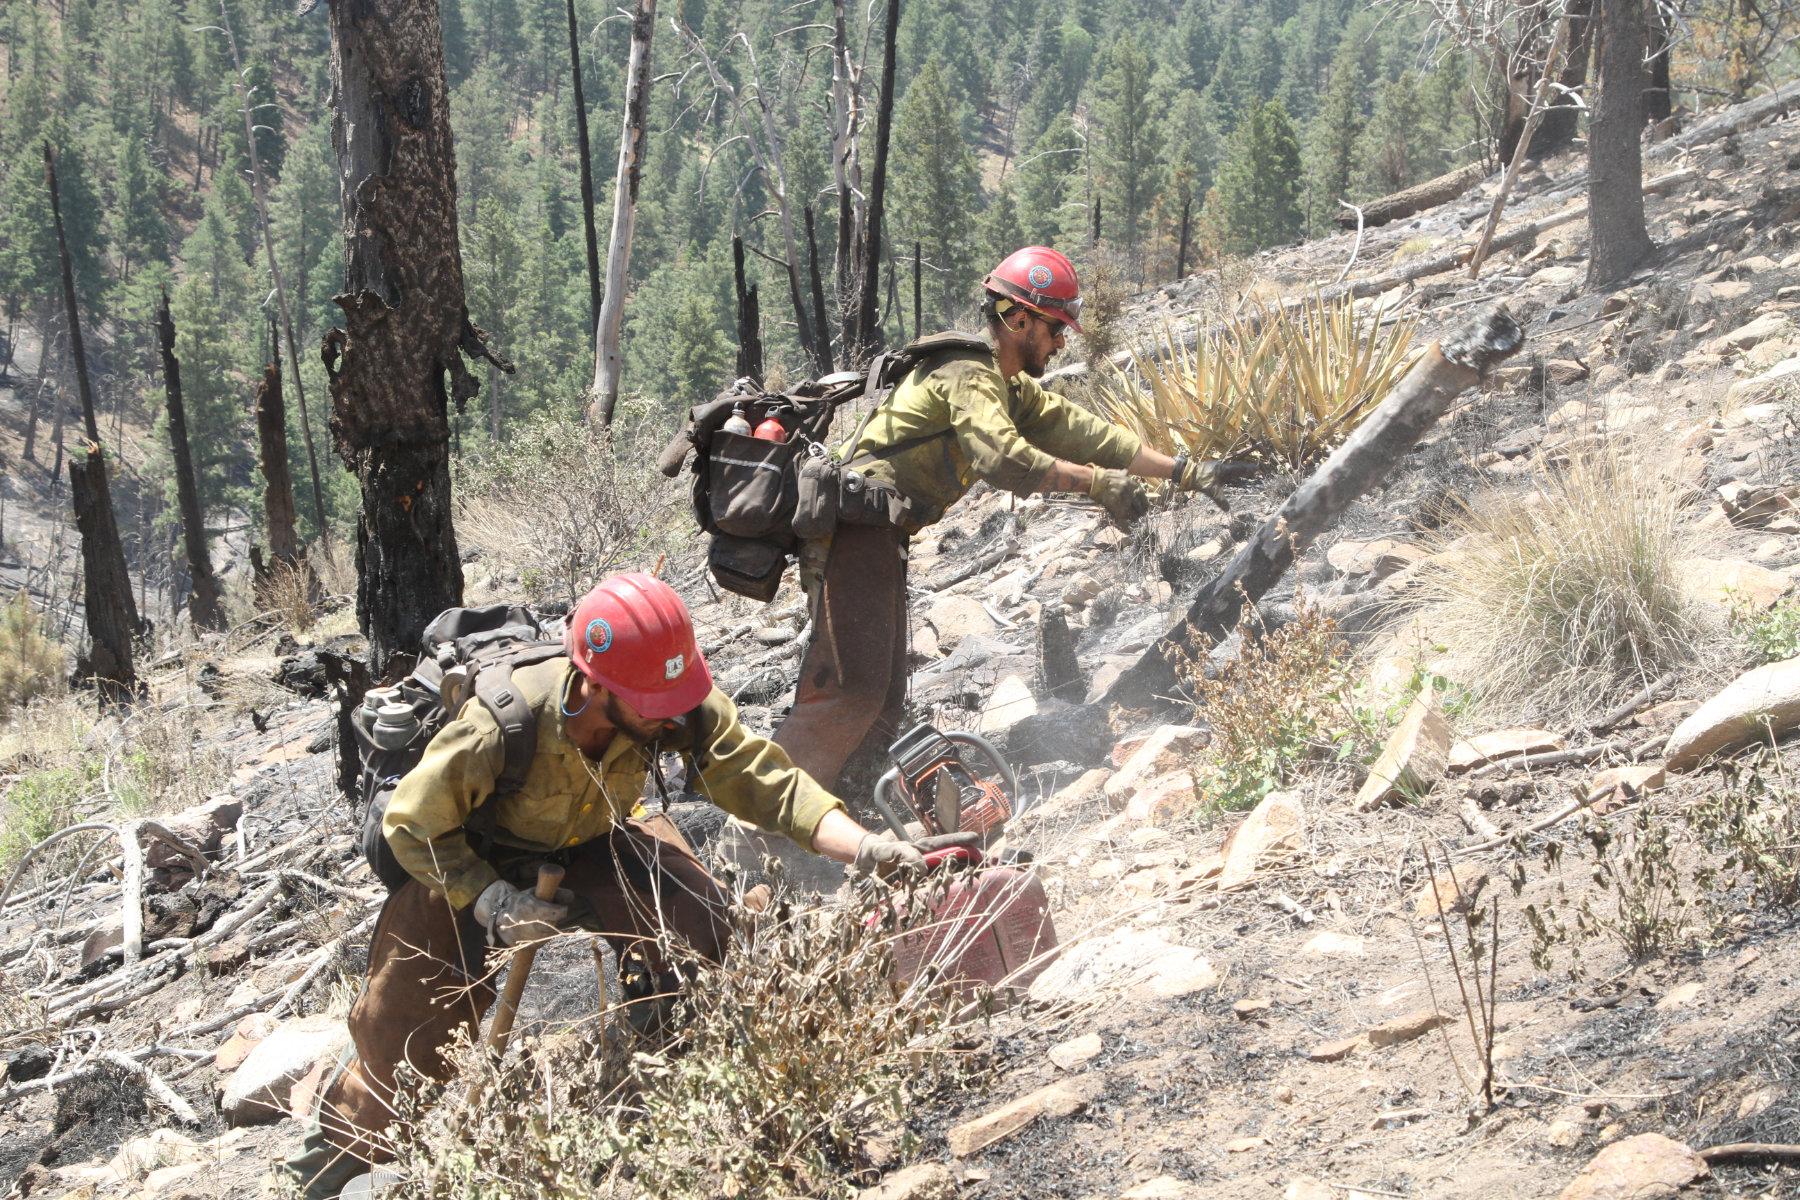 Two wildland fire fighters clear debris along a steep mountainside.